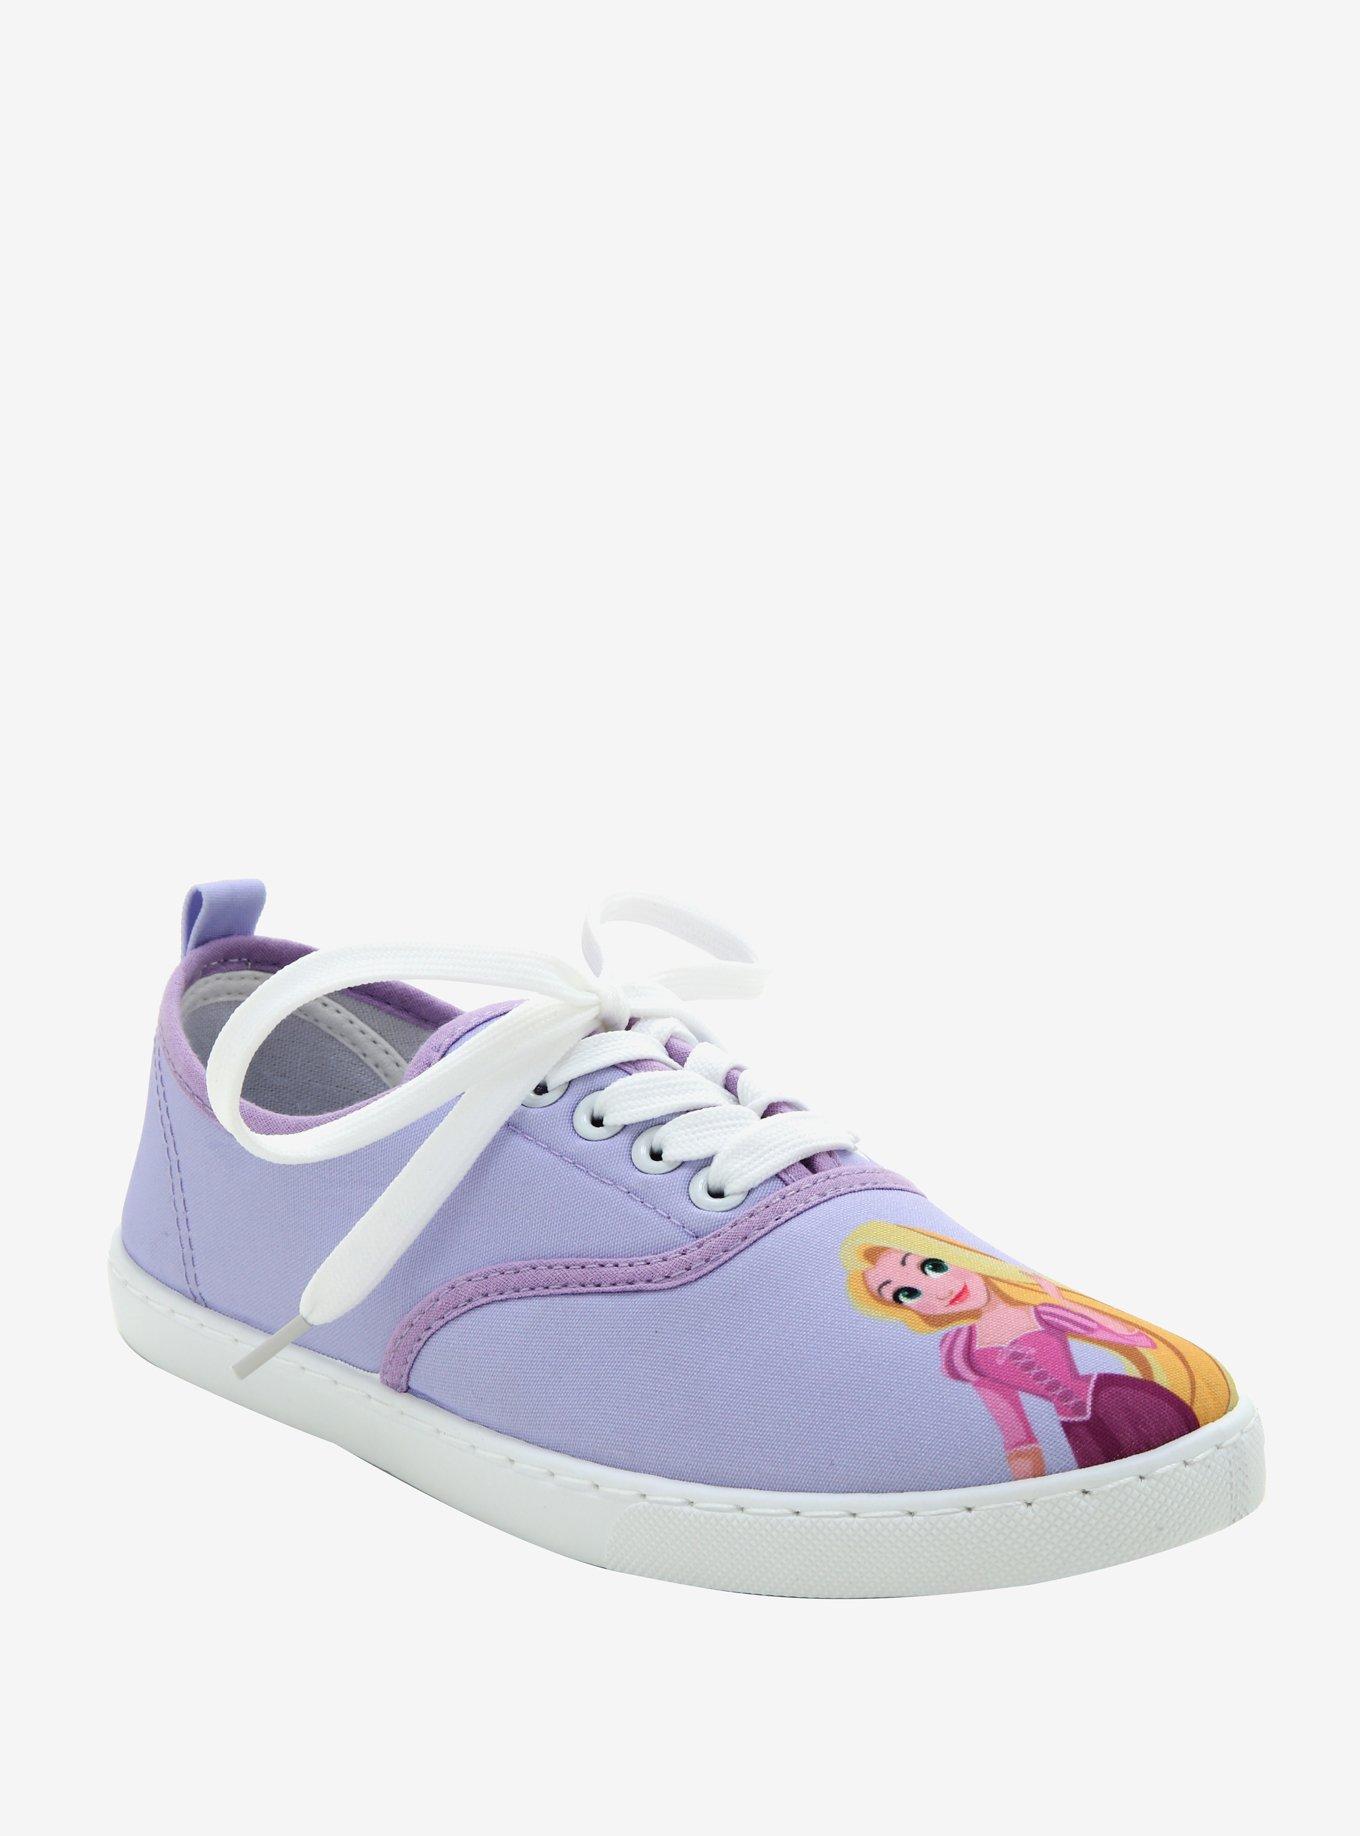 Disney Tangled Rapunzel & Pascal Lace-Up Sneakers, MULTI, alternate